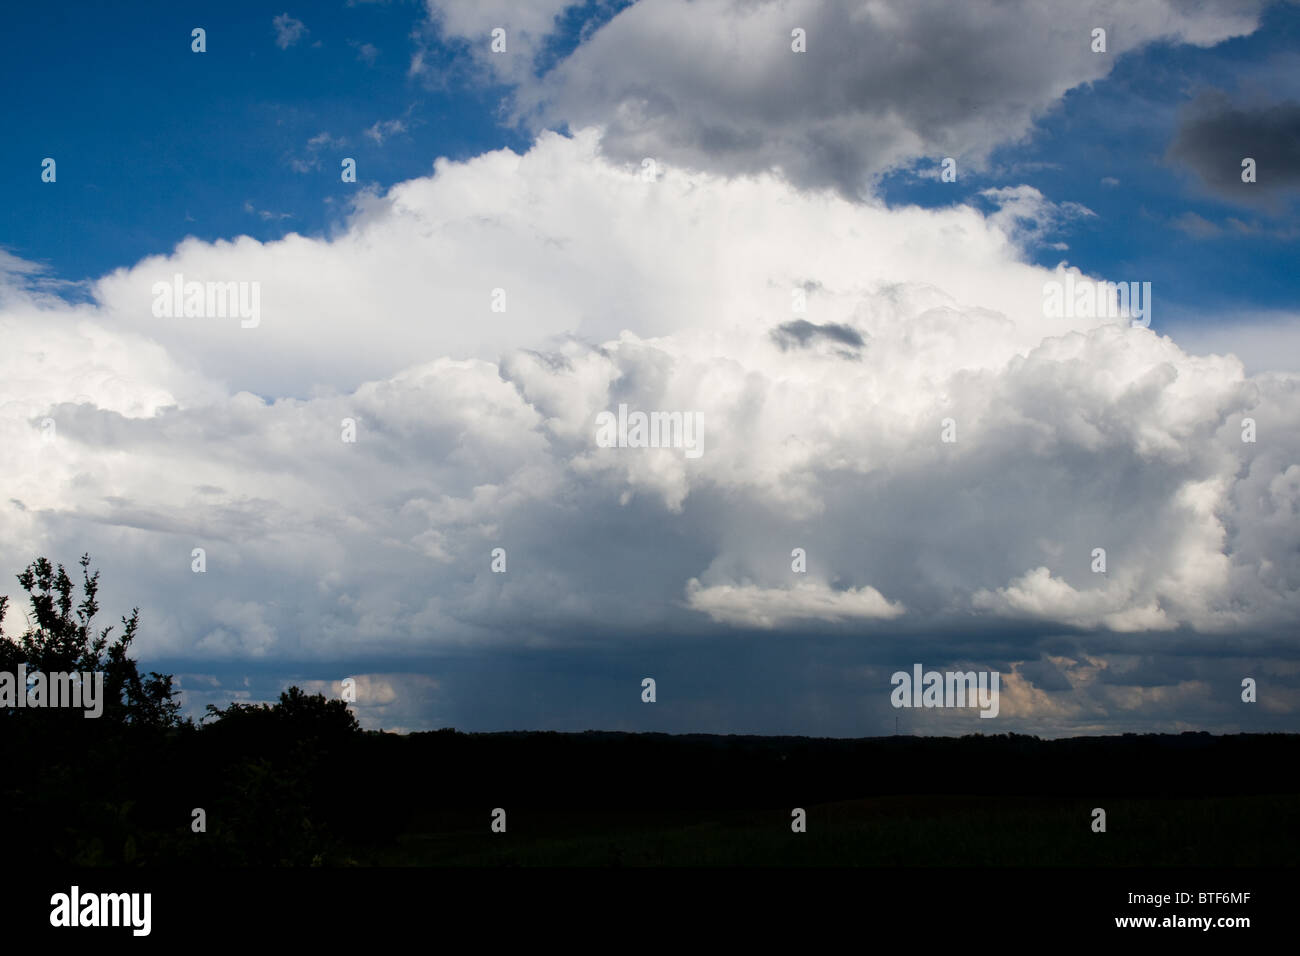 Severe Thunderstorm - Ominous Clouds Stock Photo